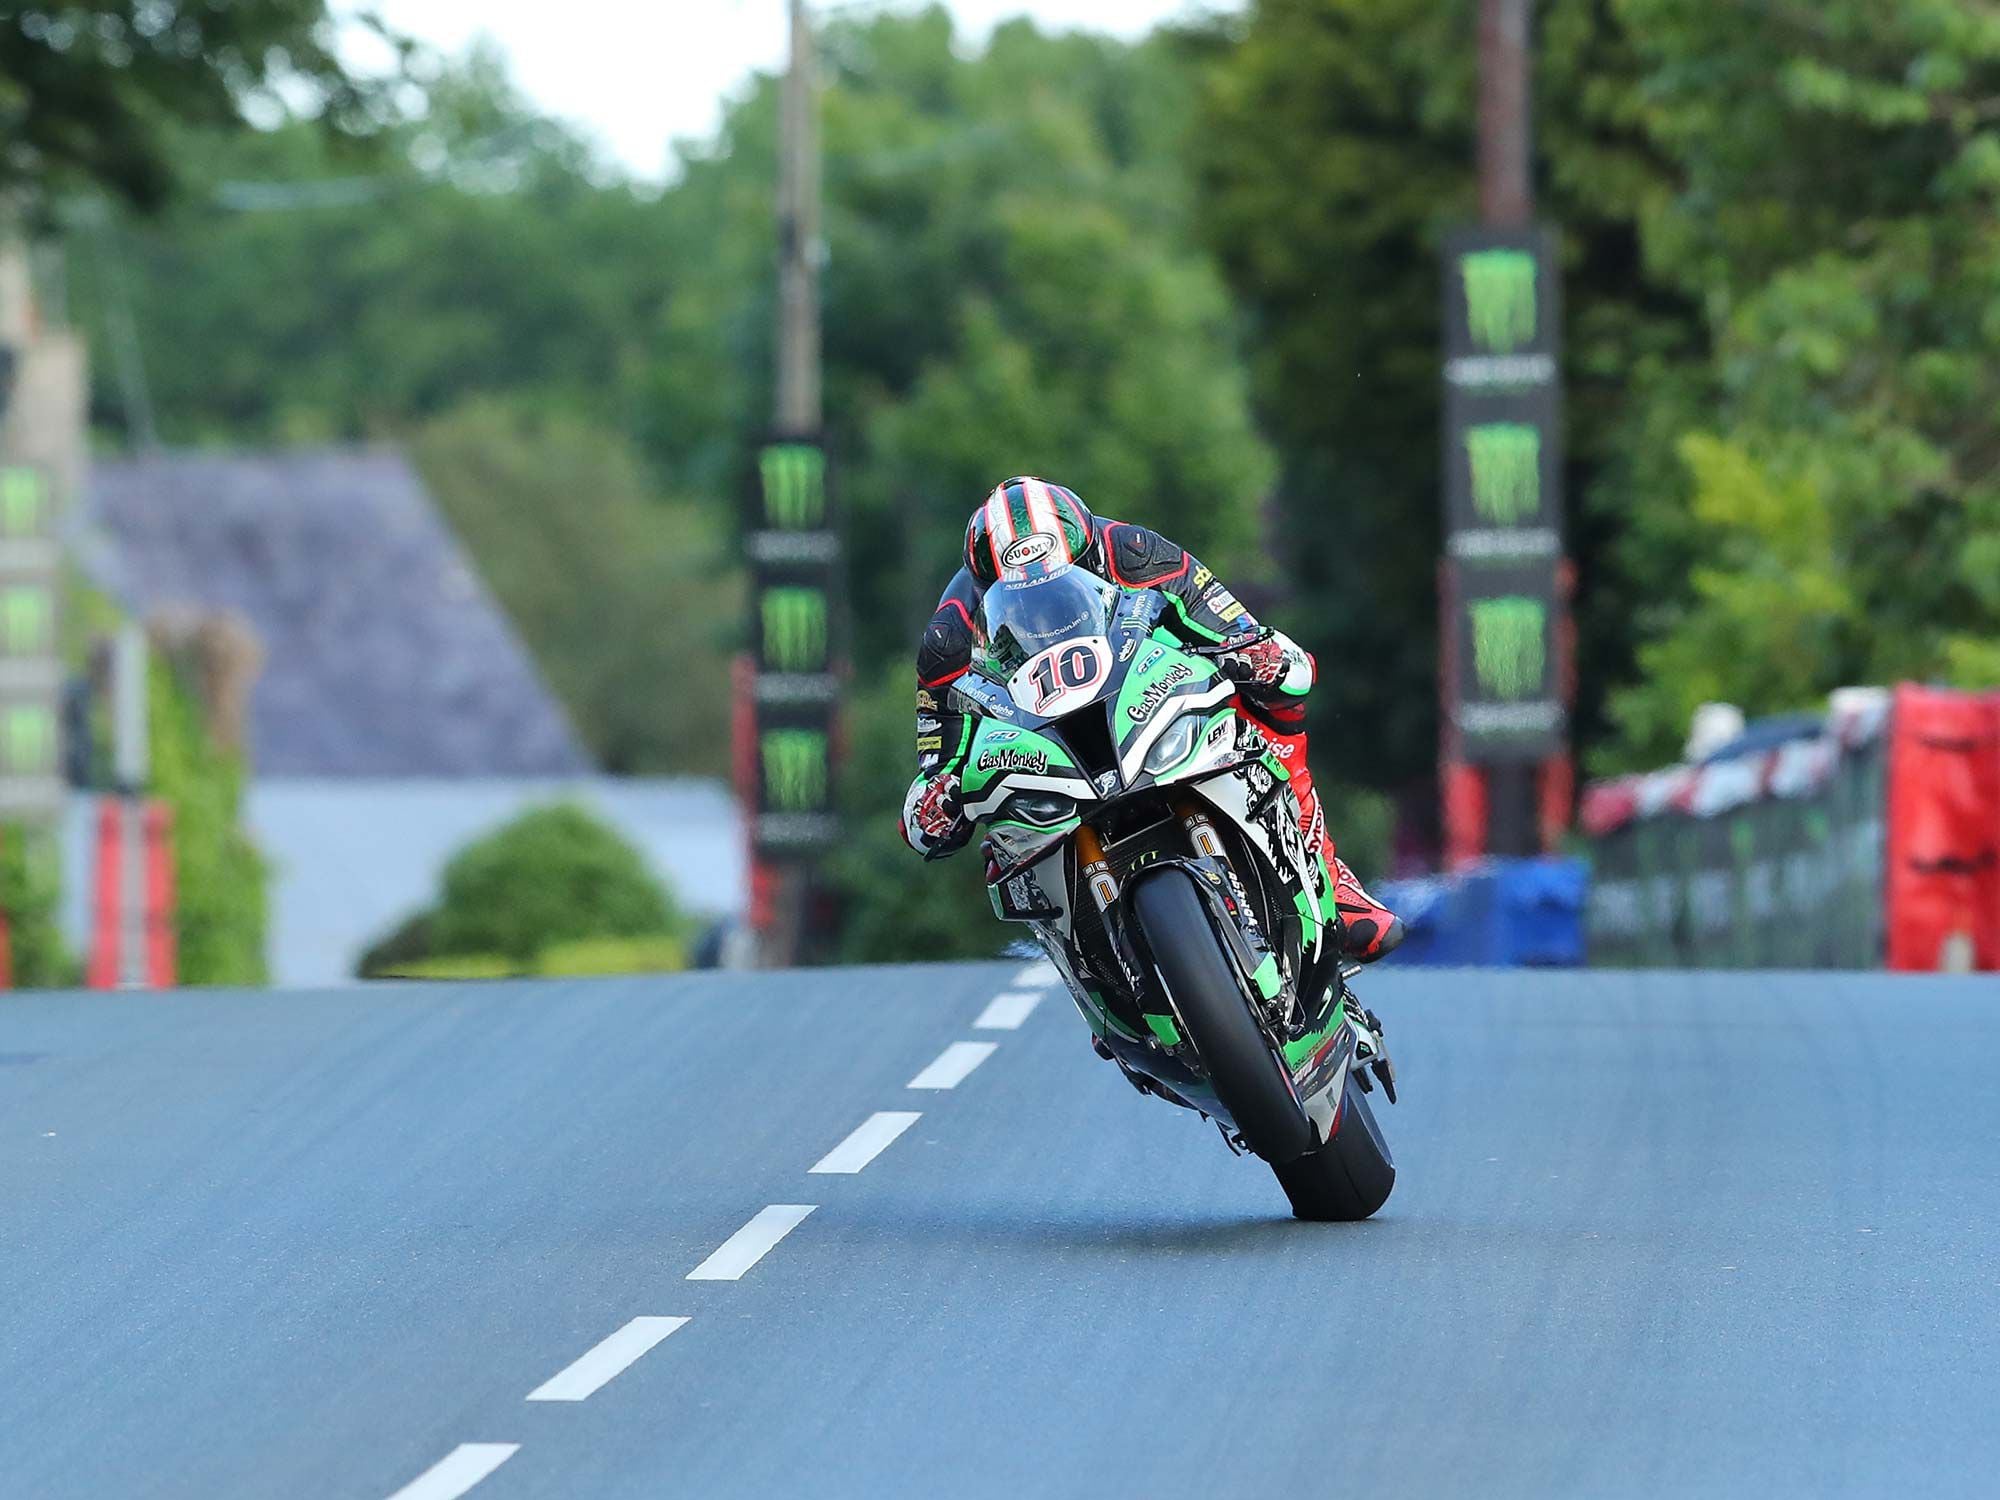 Peter Hickman ended qualifying with a lock on the Superbike class, lapping at an impressive 132.874 mph. Dynastic talent Michael Dunlop leads the Superstock, Supersport, and Supertwin leaderboards.